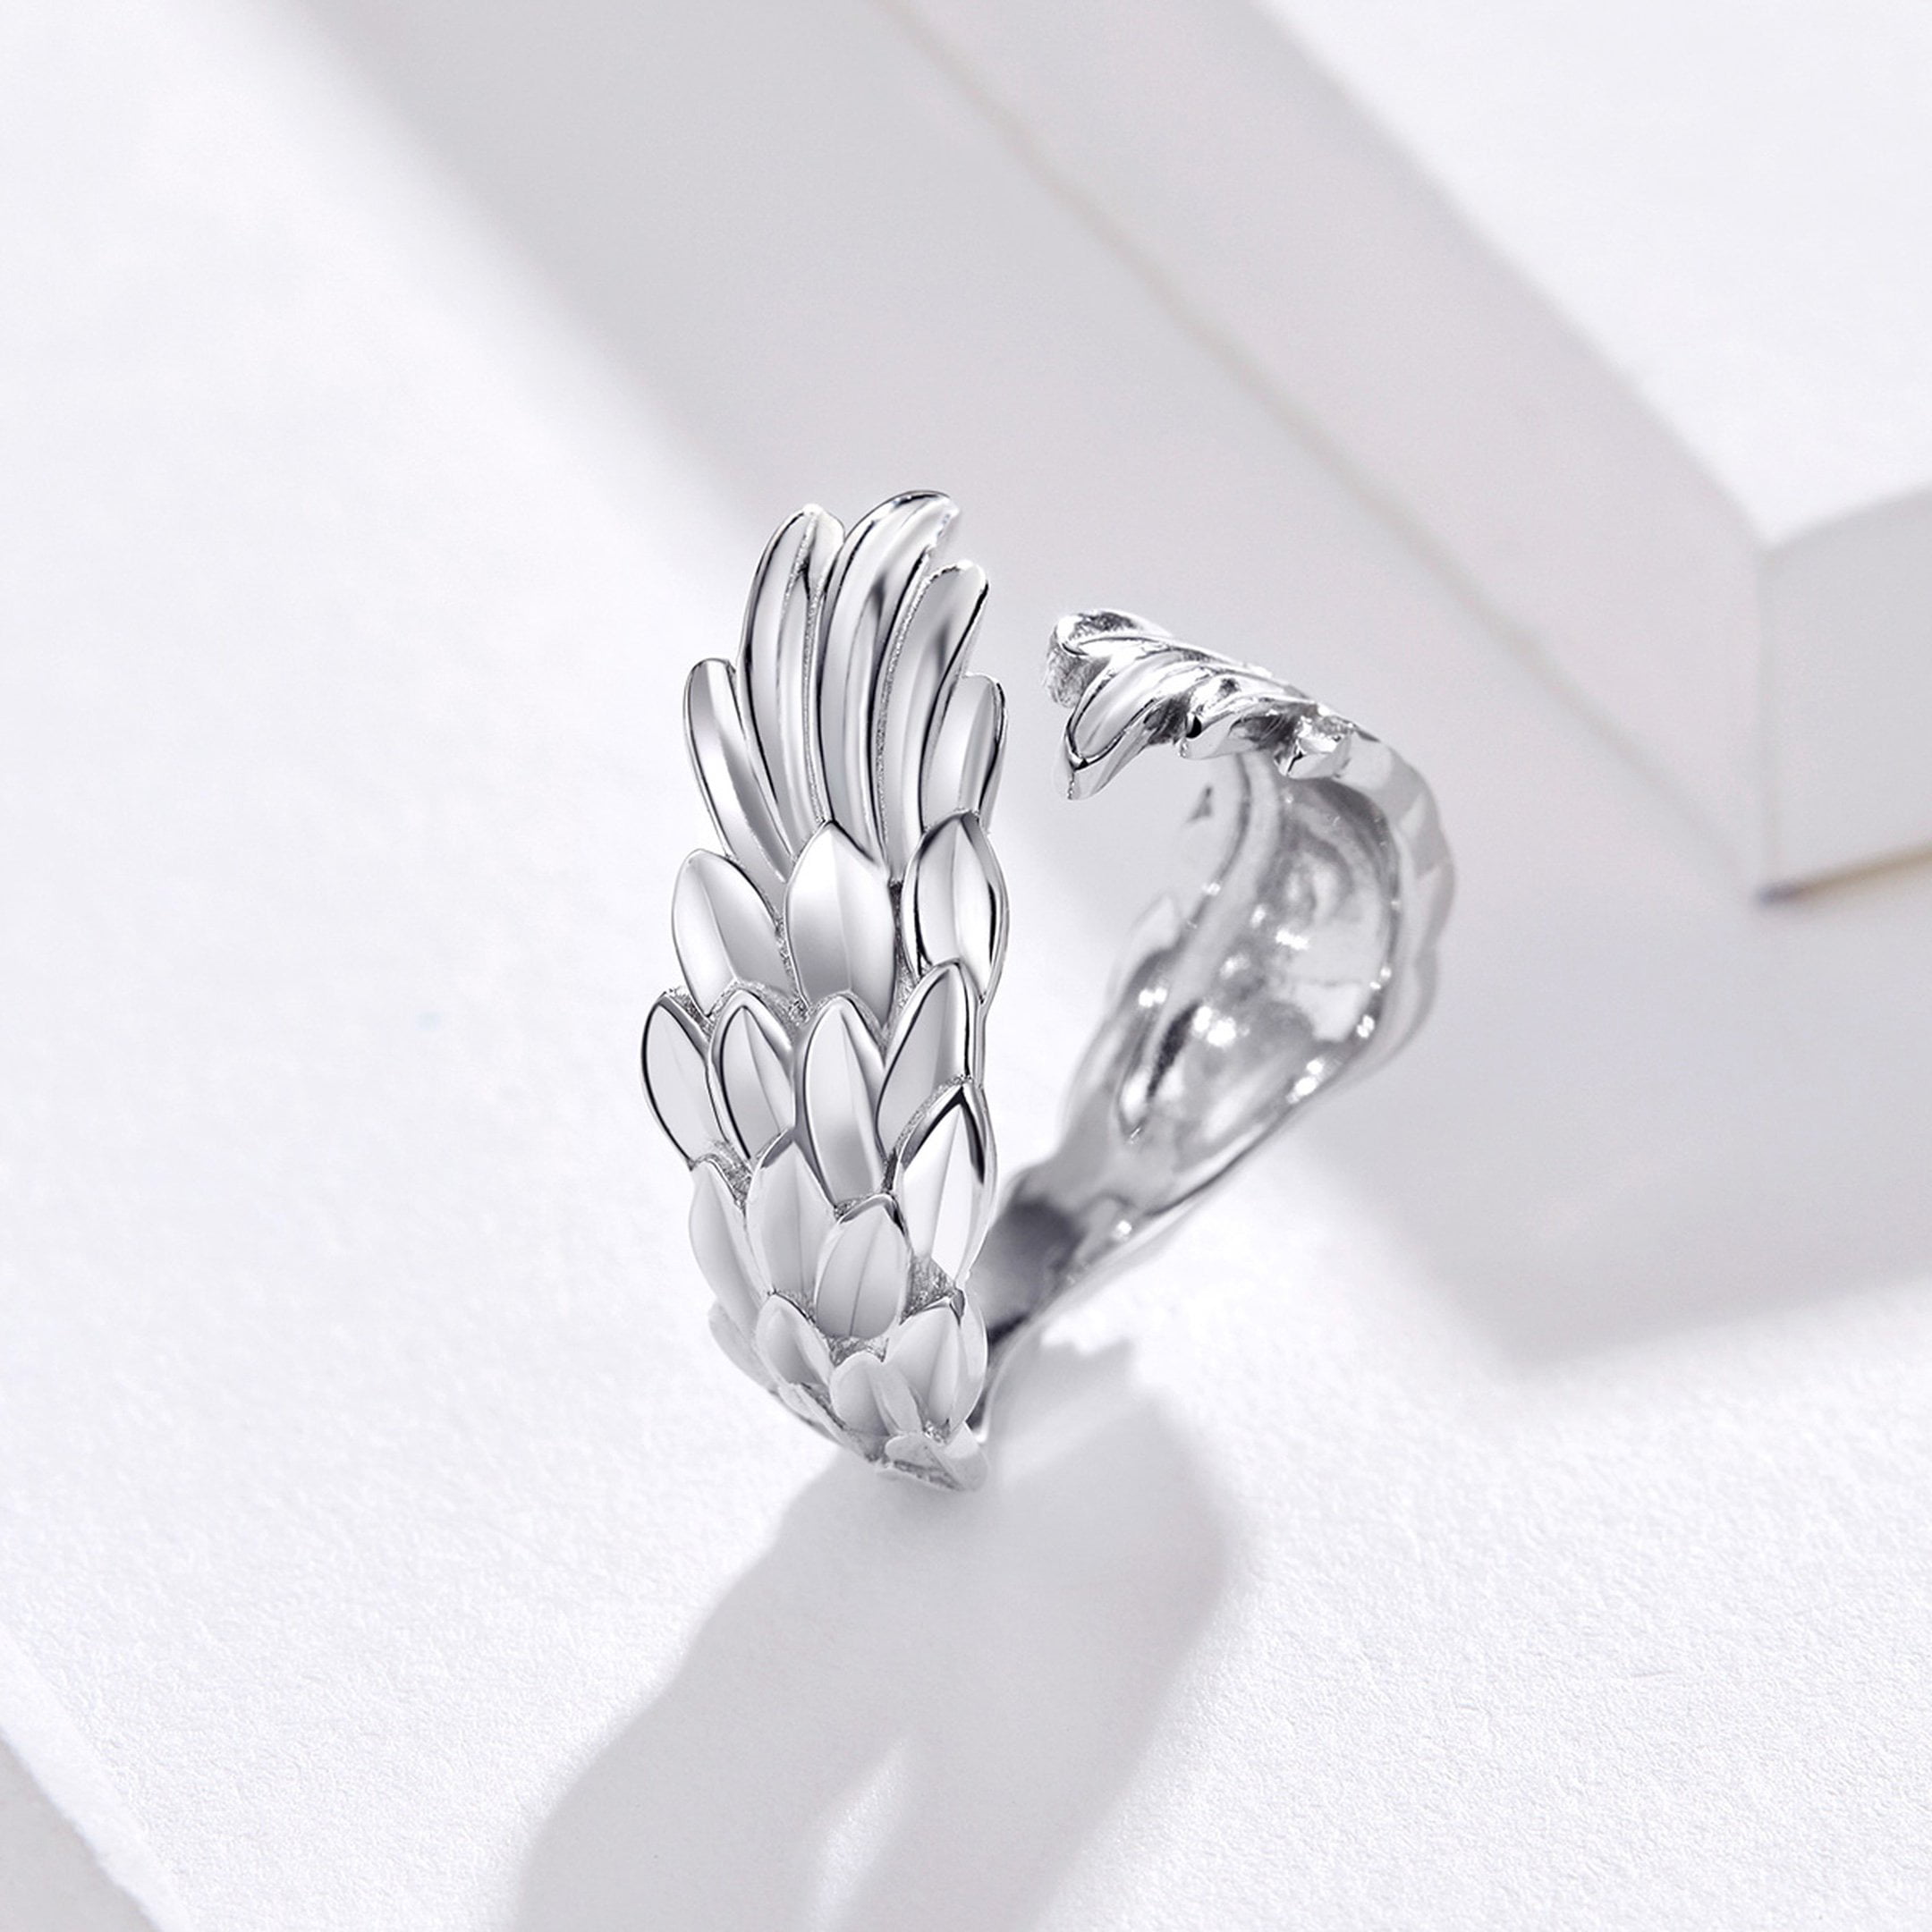 HUKKUN Angel Wing Rings for Women Sterling Silver Divisible Rings Gifts for Girlfriend Size 6 to 9 